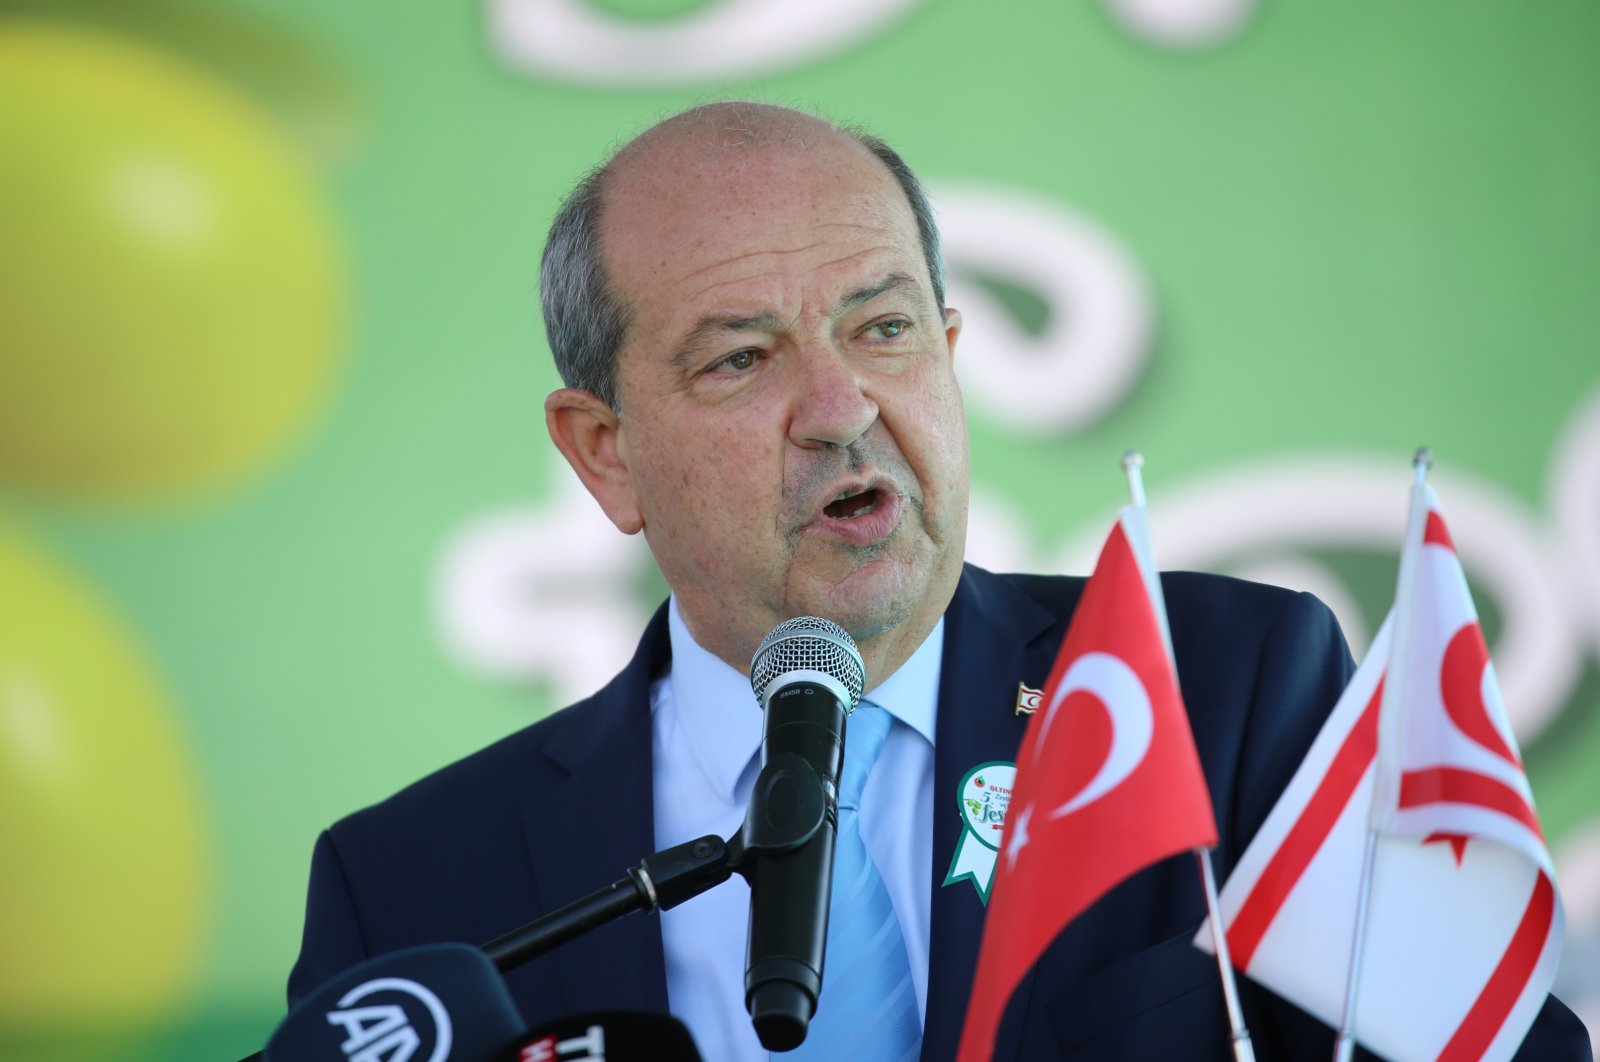 President of the Turkish Republic of Northern Cyprus (TRNC) Ersin Tatar during an event in Hatay province, Turkey, Oct. 23, 2021 (AA Photo)